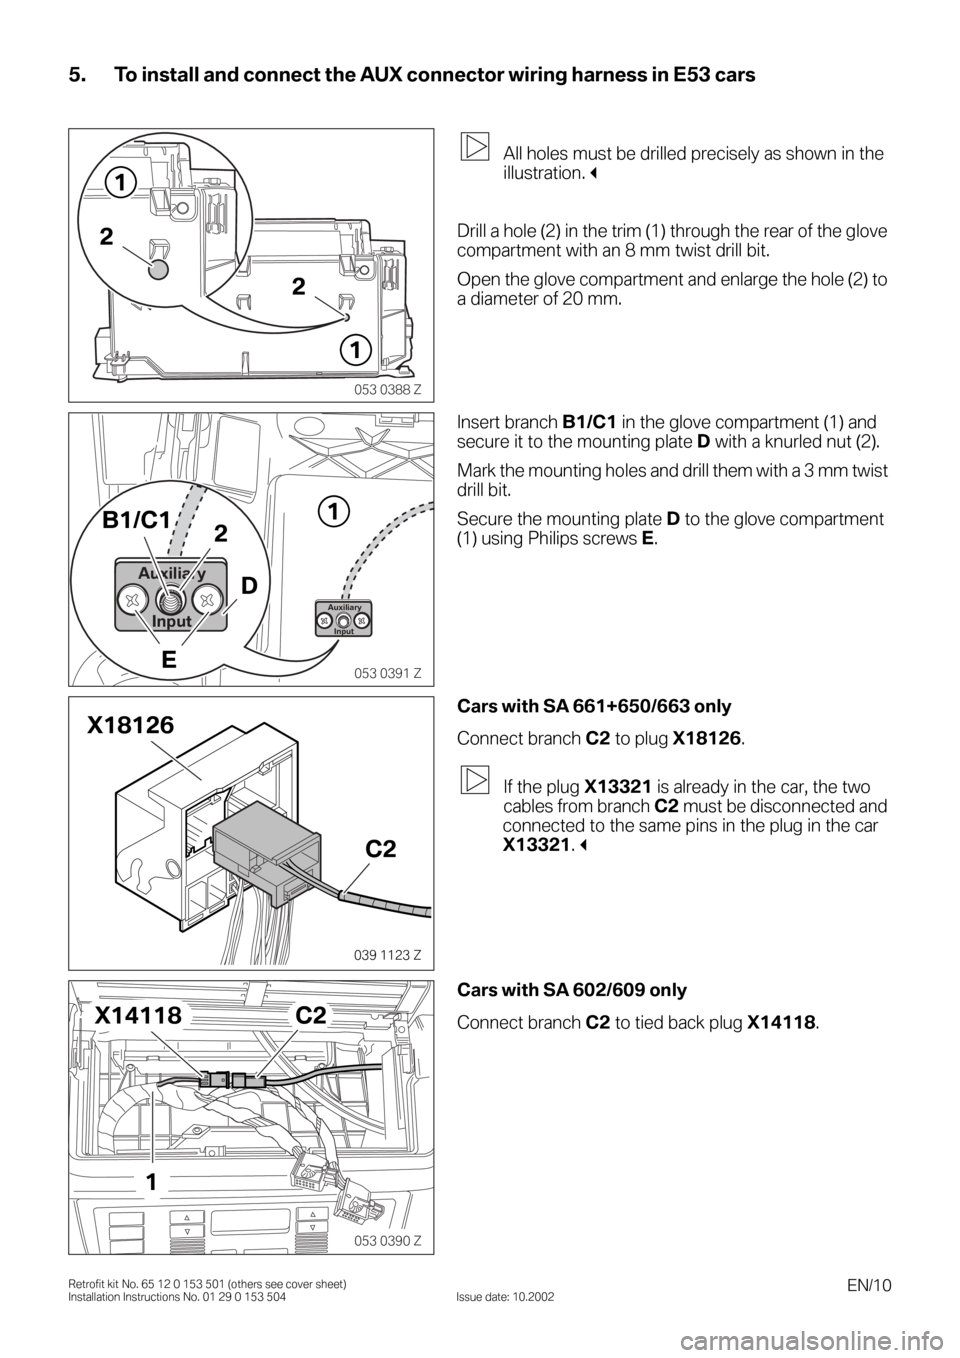 BMW 3 SERIES 2005 E46 Auxilliary Connector Installation Instruction Manual EN/10Retrofit kit No. 65 12 0 153 501 (others see cover sheet)
Installation Instructions No. 01 29 0 153 504 Issue date: 10.2002
5. To install and connect the AUX connector wiring harness in E53 cars
